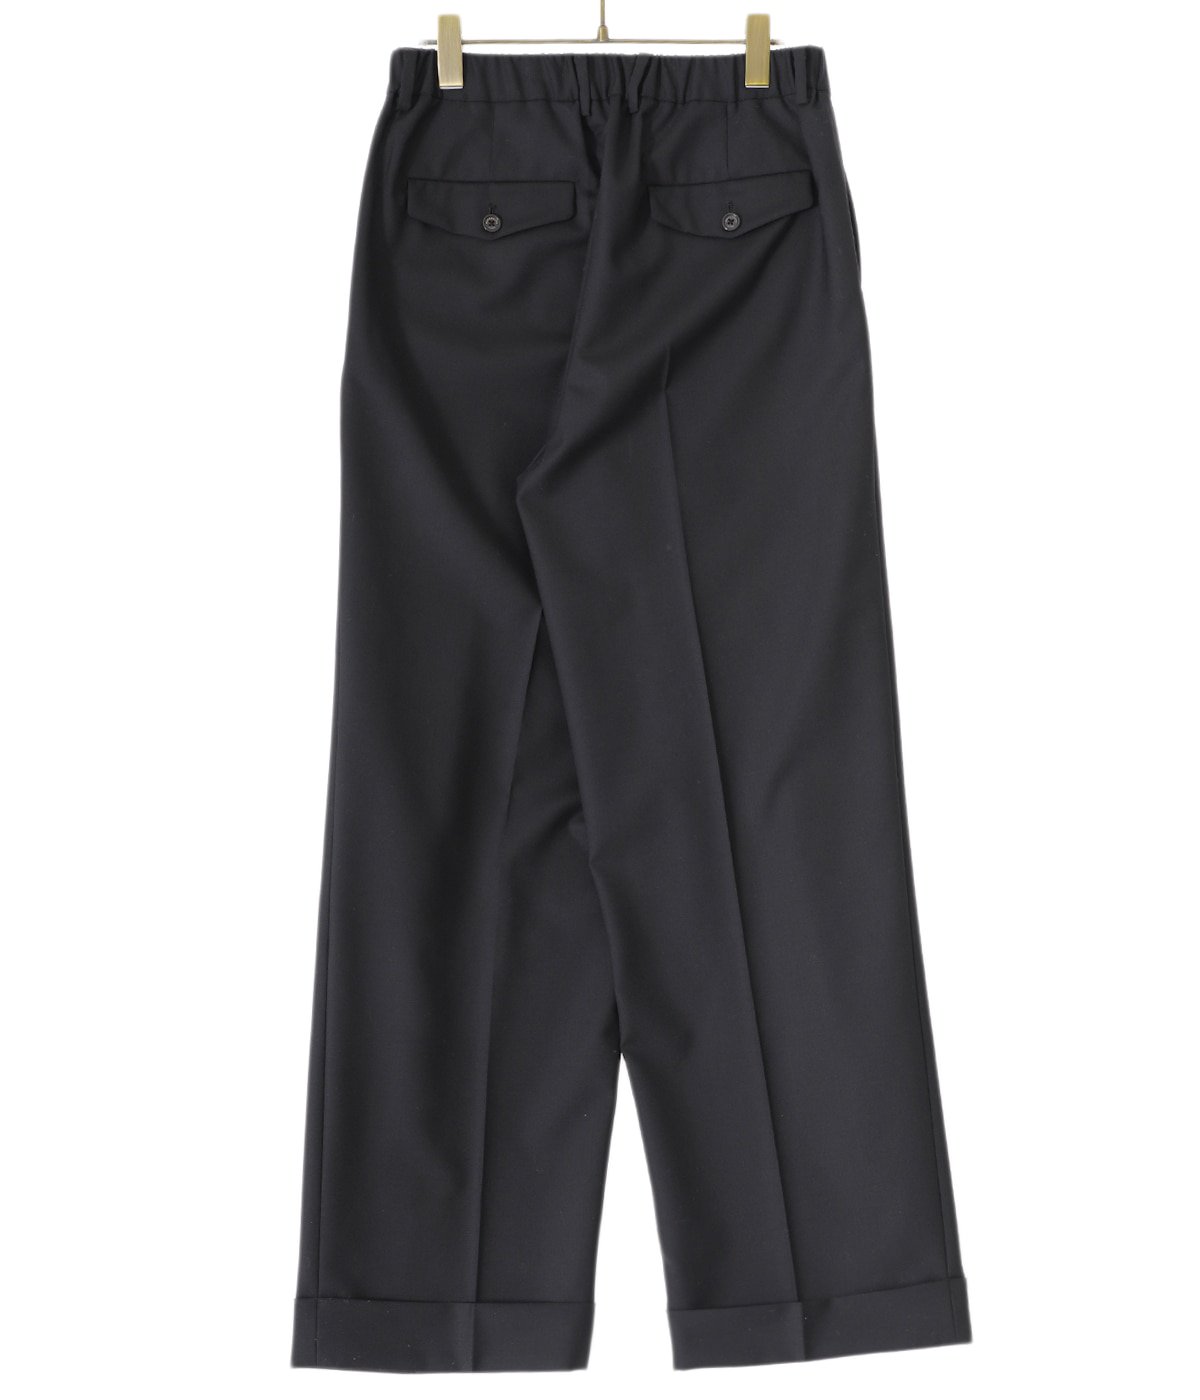 DOUBLE PLEATED CLASSIC WIDE TROUSERS